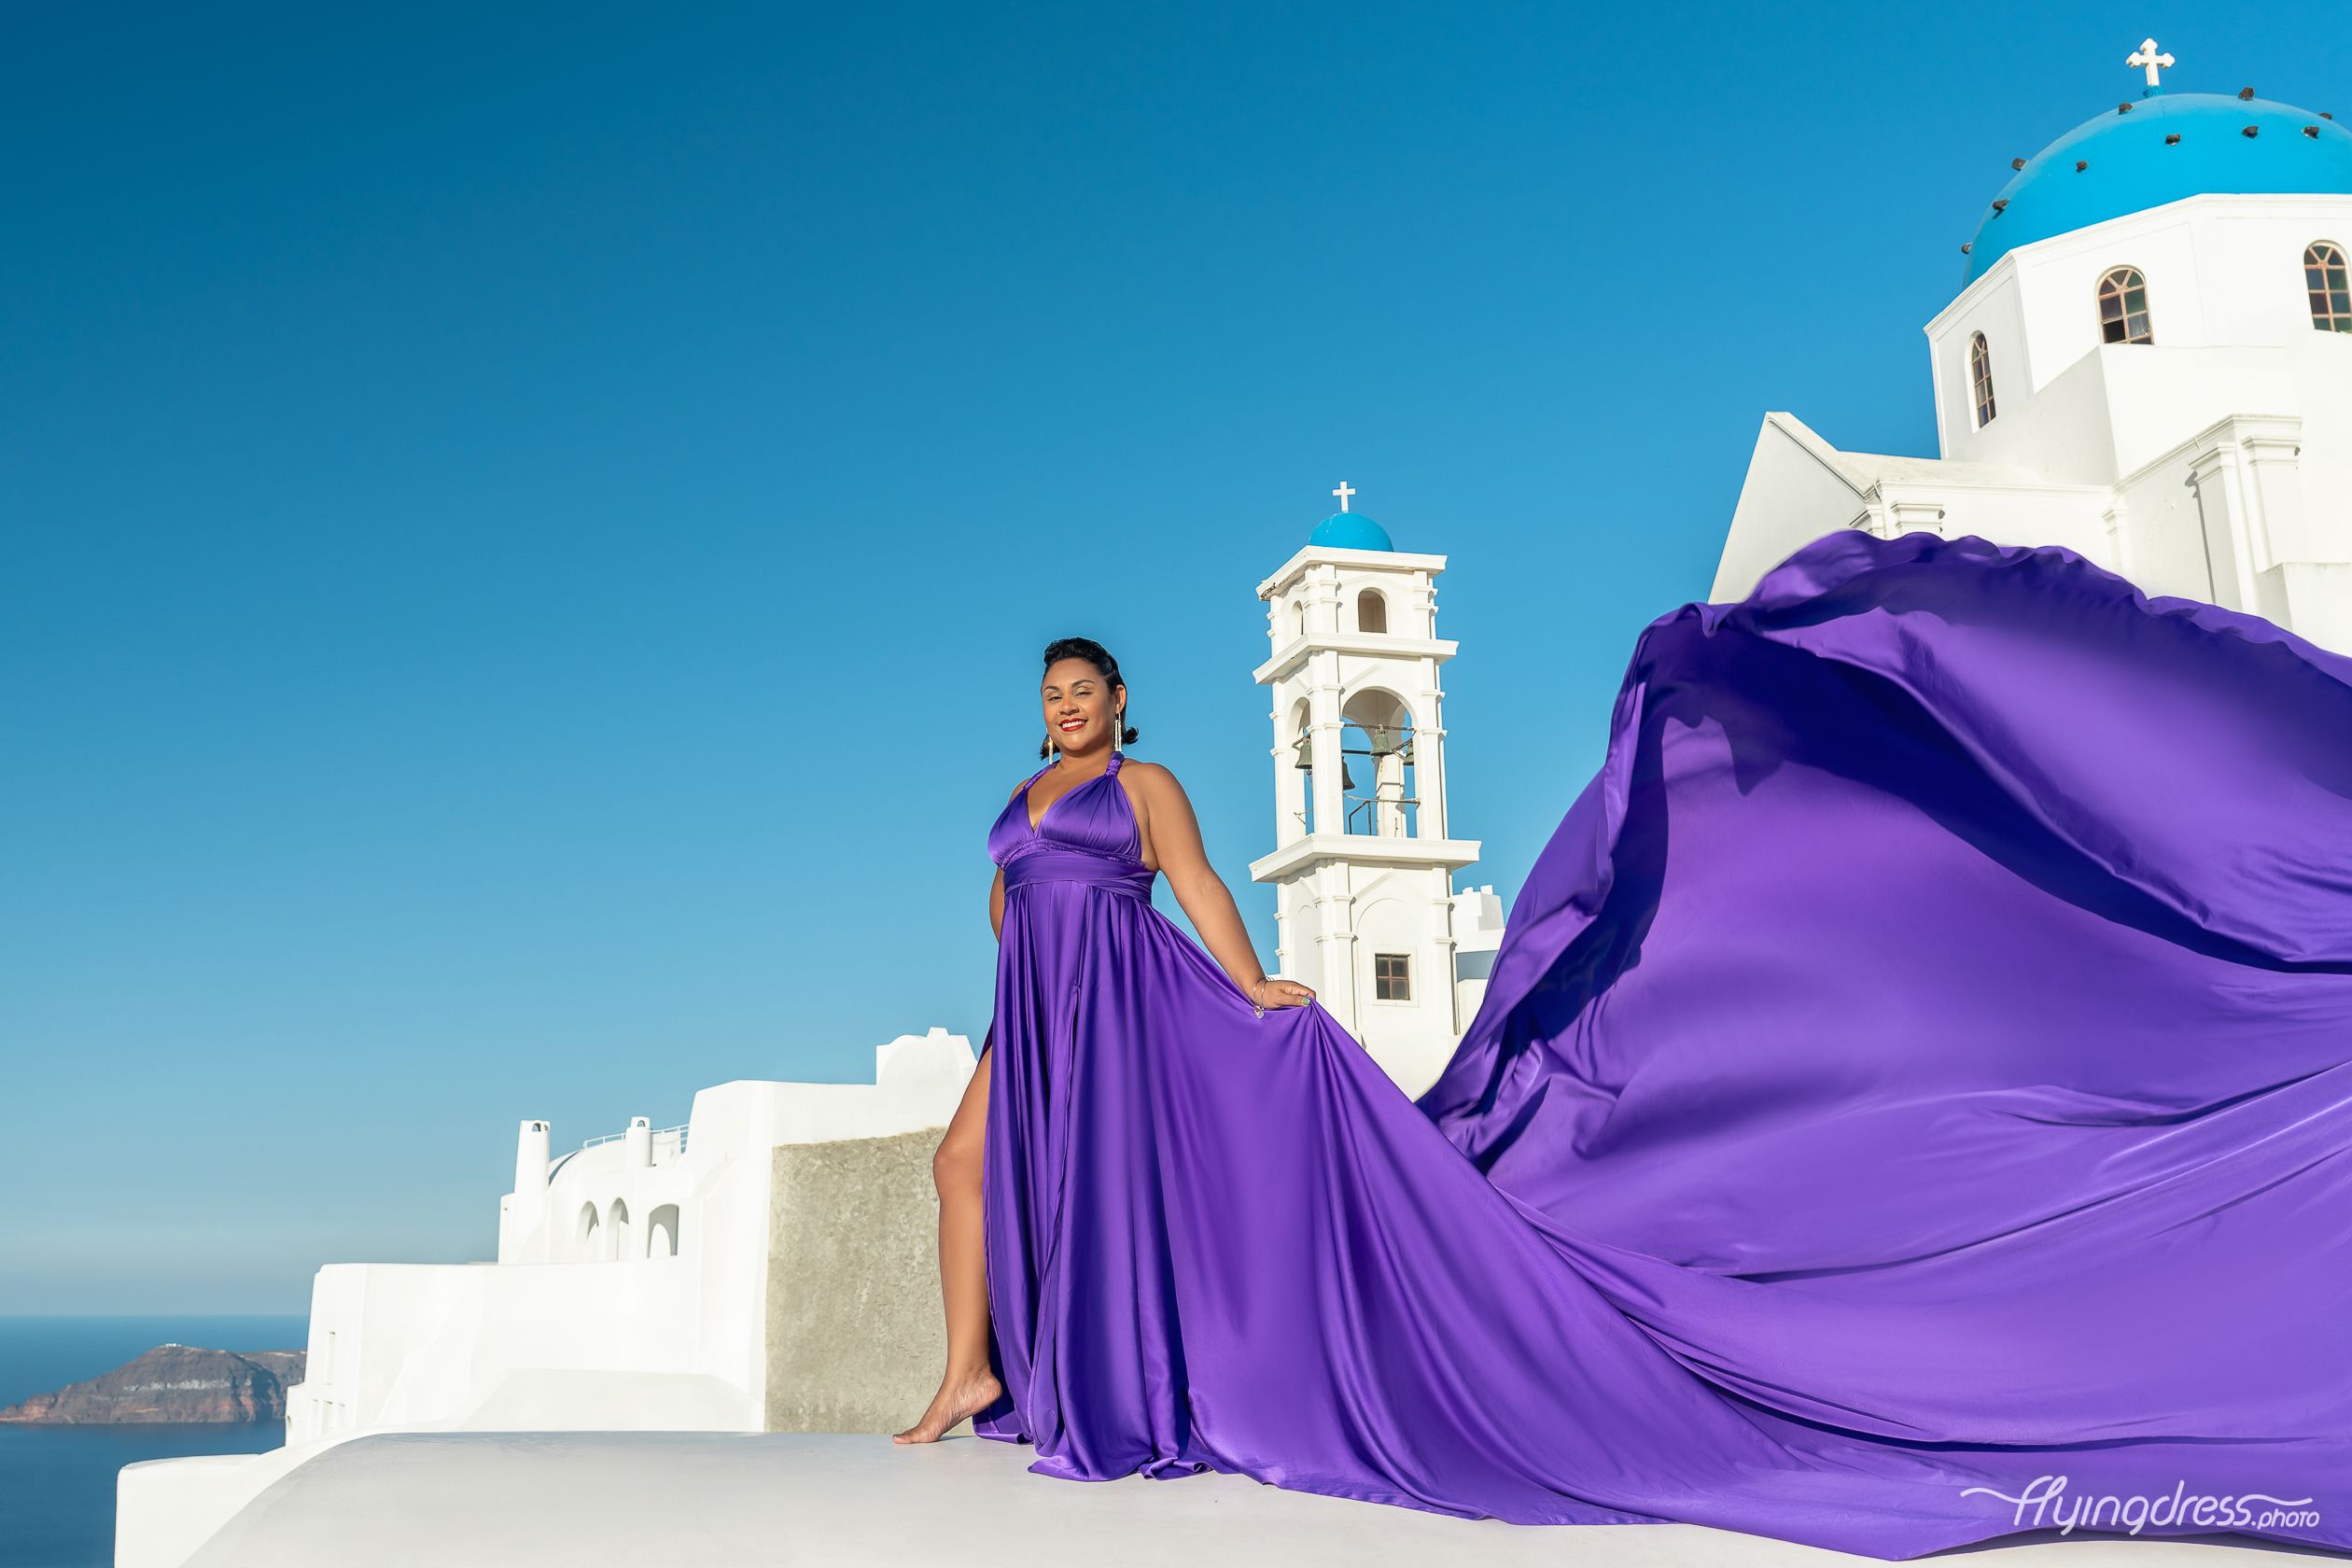 Ultraviolet flying dress photoshoot with blue domes in Santorini